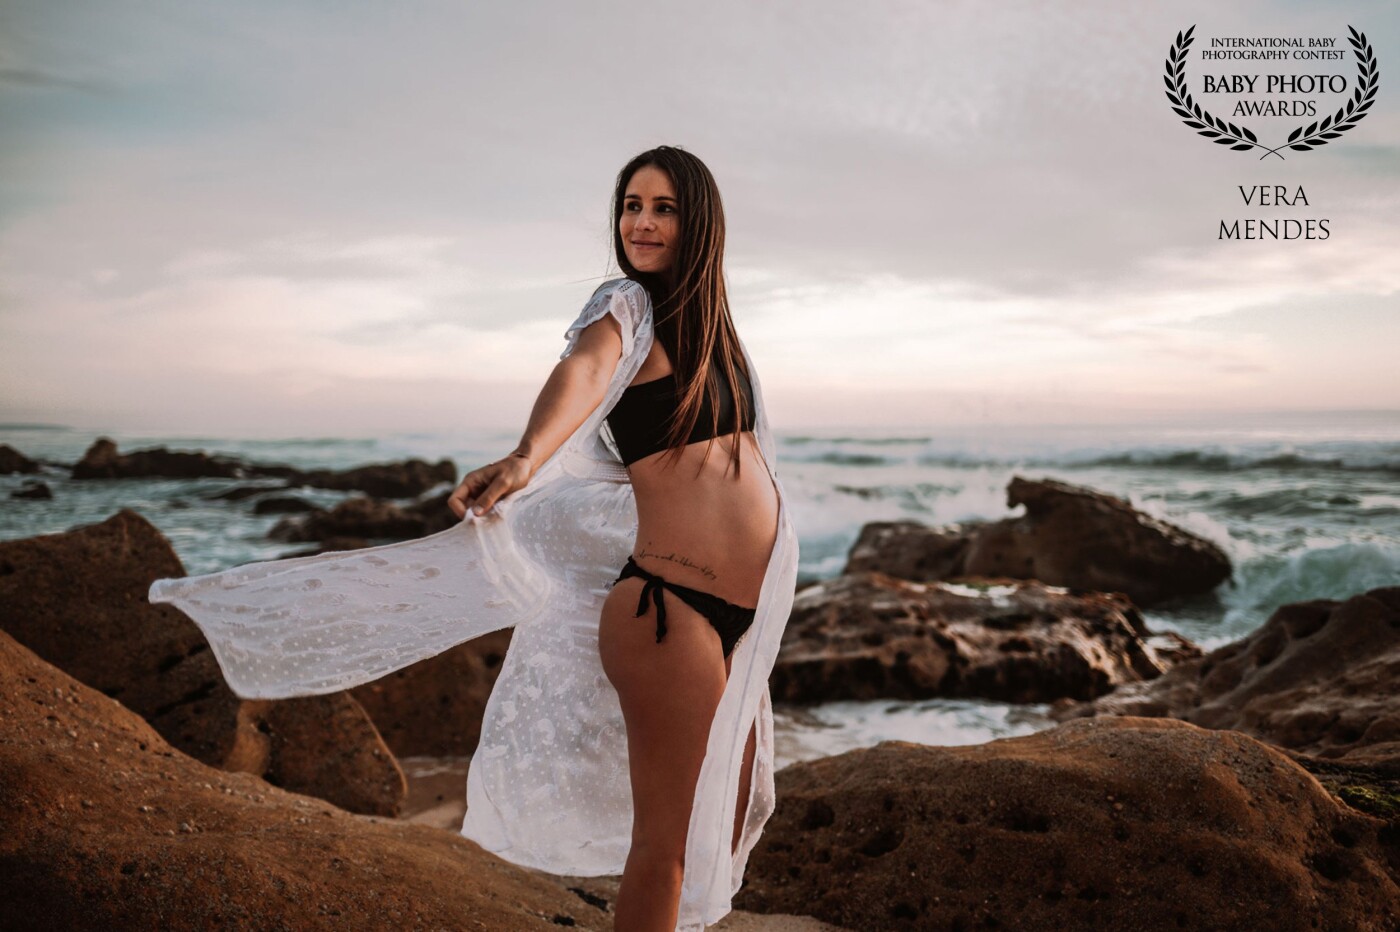 Photo sessions on the beach in the sunset light are my favorites. It is a light that transmits magic in the air and that combines perfectly with the color of the sea. And this is one of my favorite beaches to photograph!